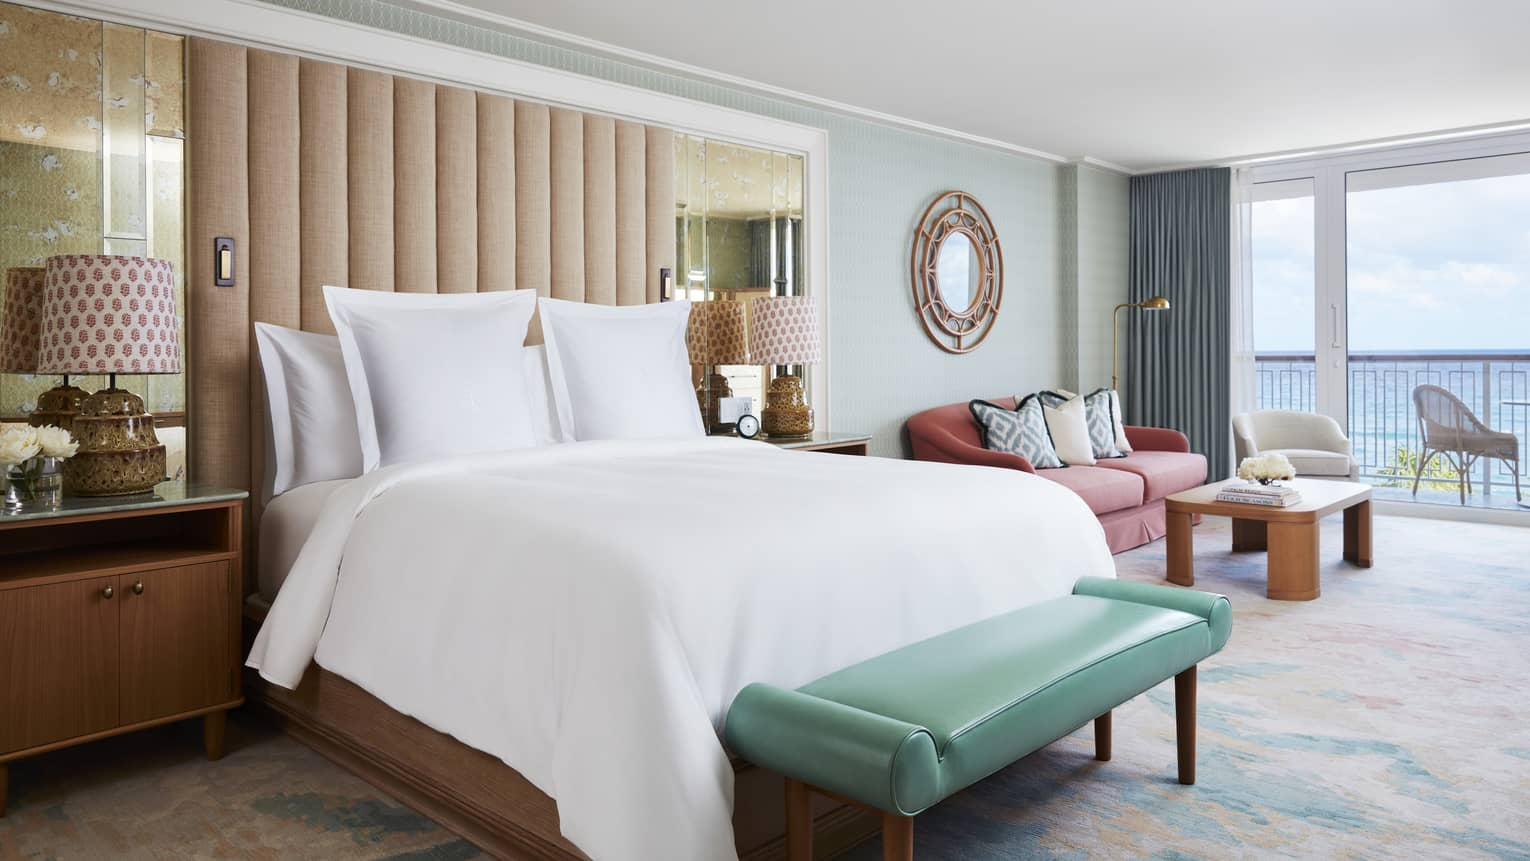 Ocean View Studio Suite bed and teal leather bench by seating area, balcony door